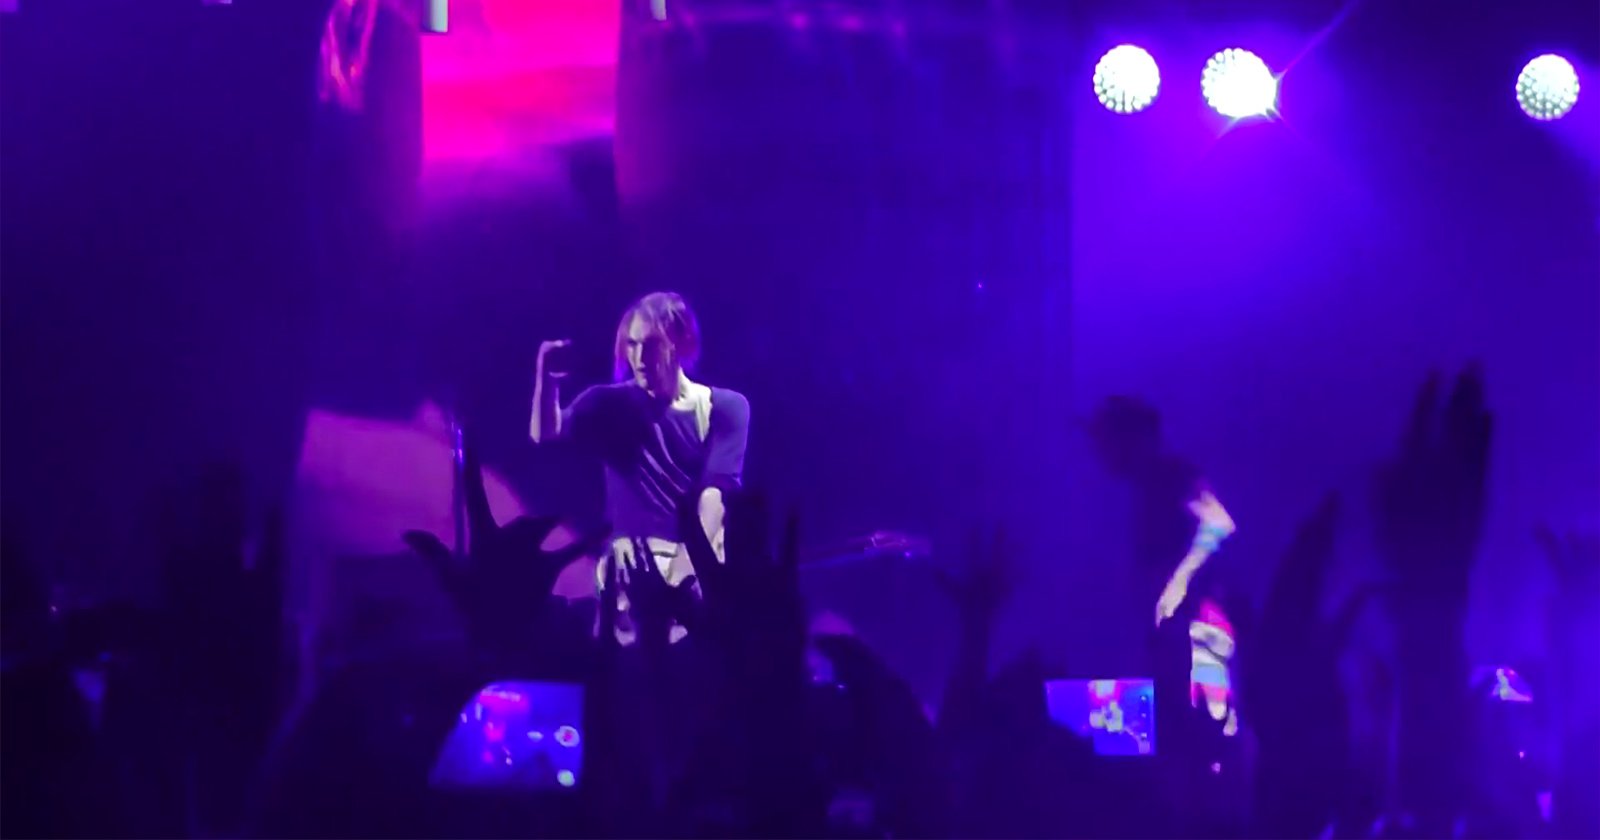 Annoyed Musician Shoots Audience with Phone Instead of Playing His Solo